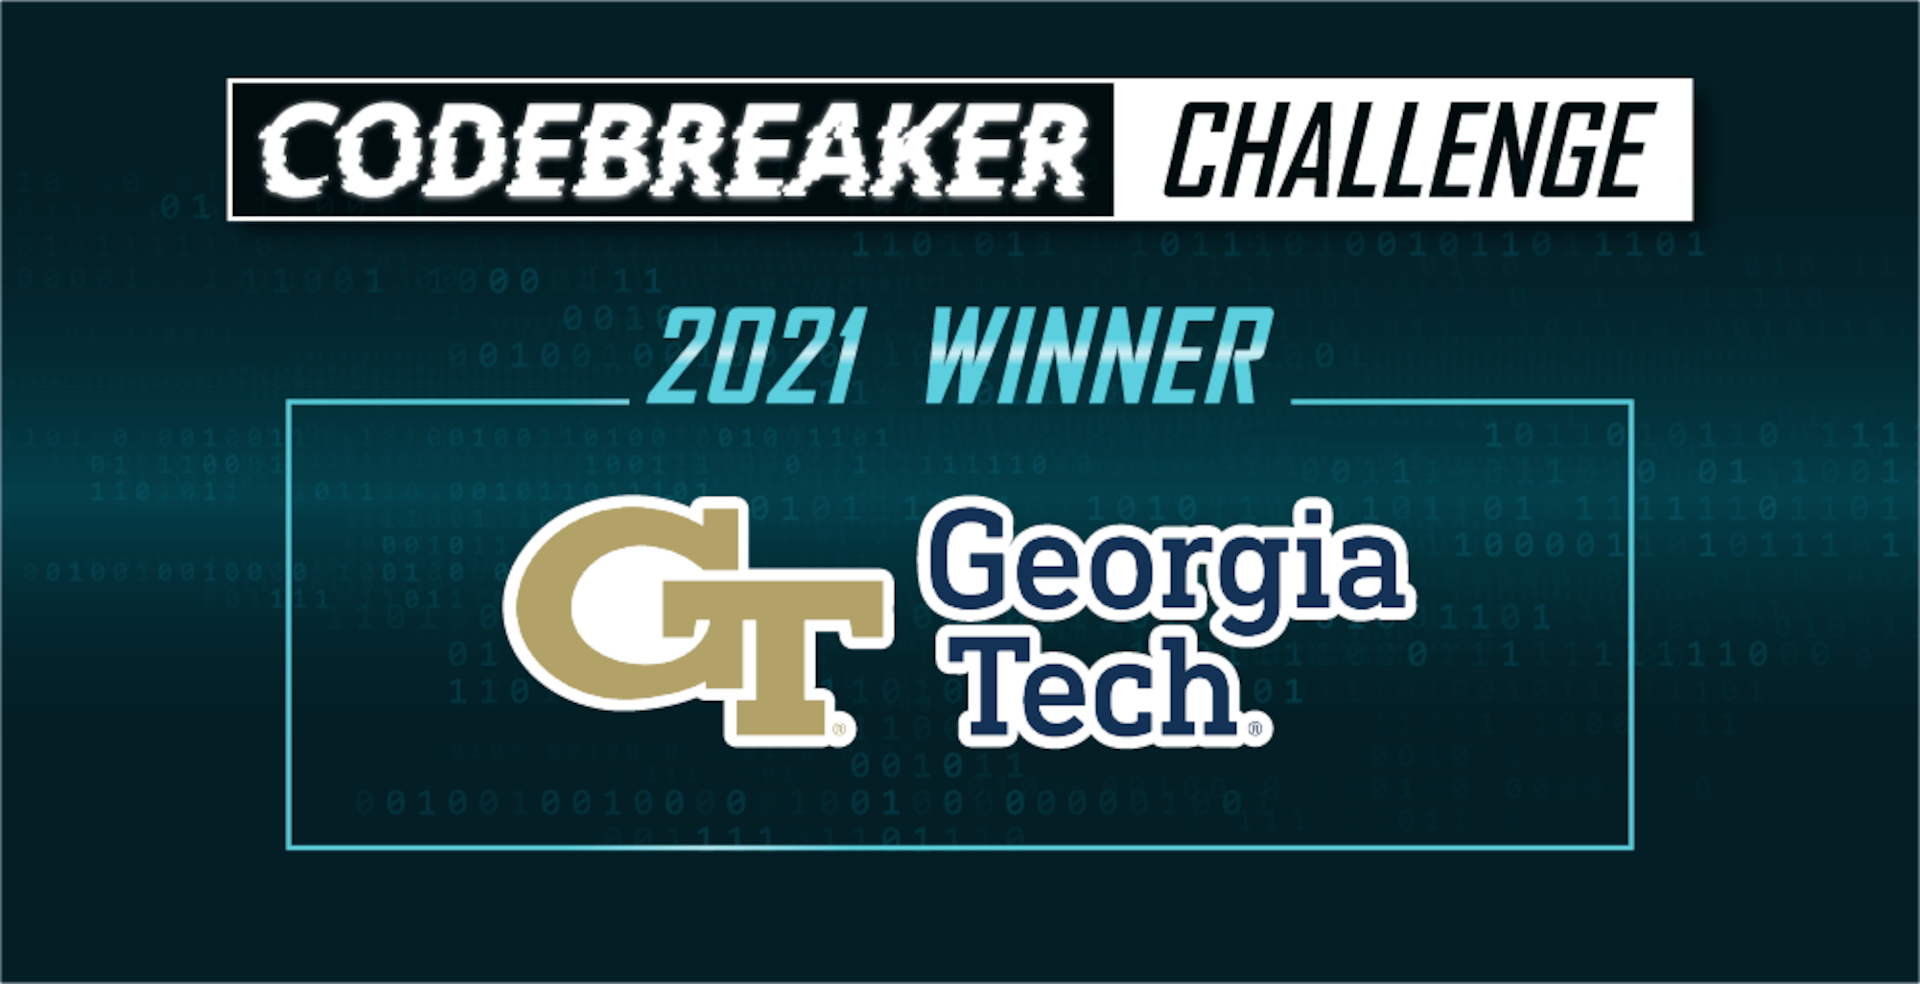 Institute of Technology wins the 2021 NSA Codebreaker Challenge